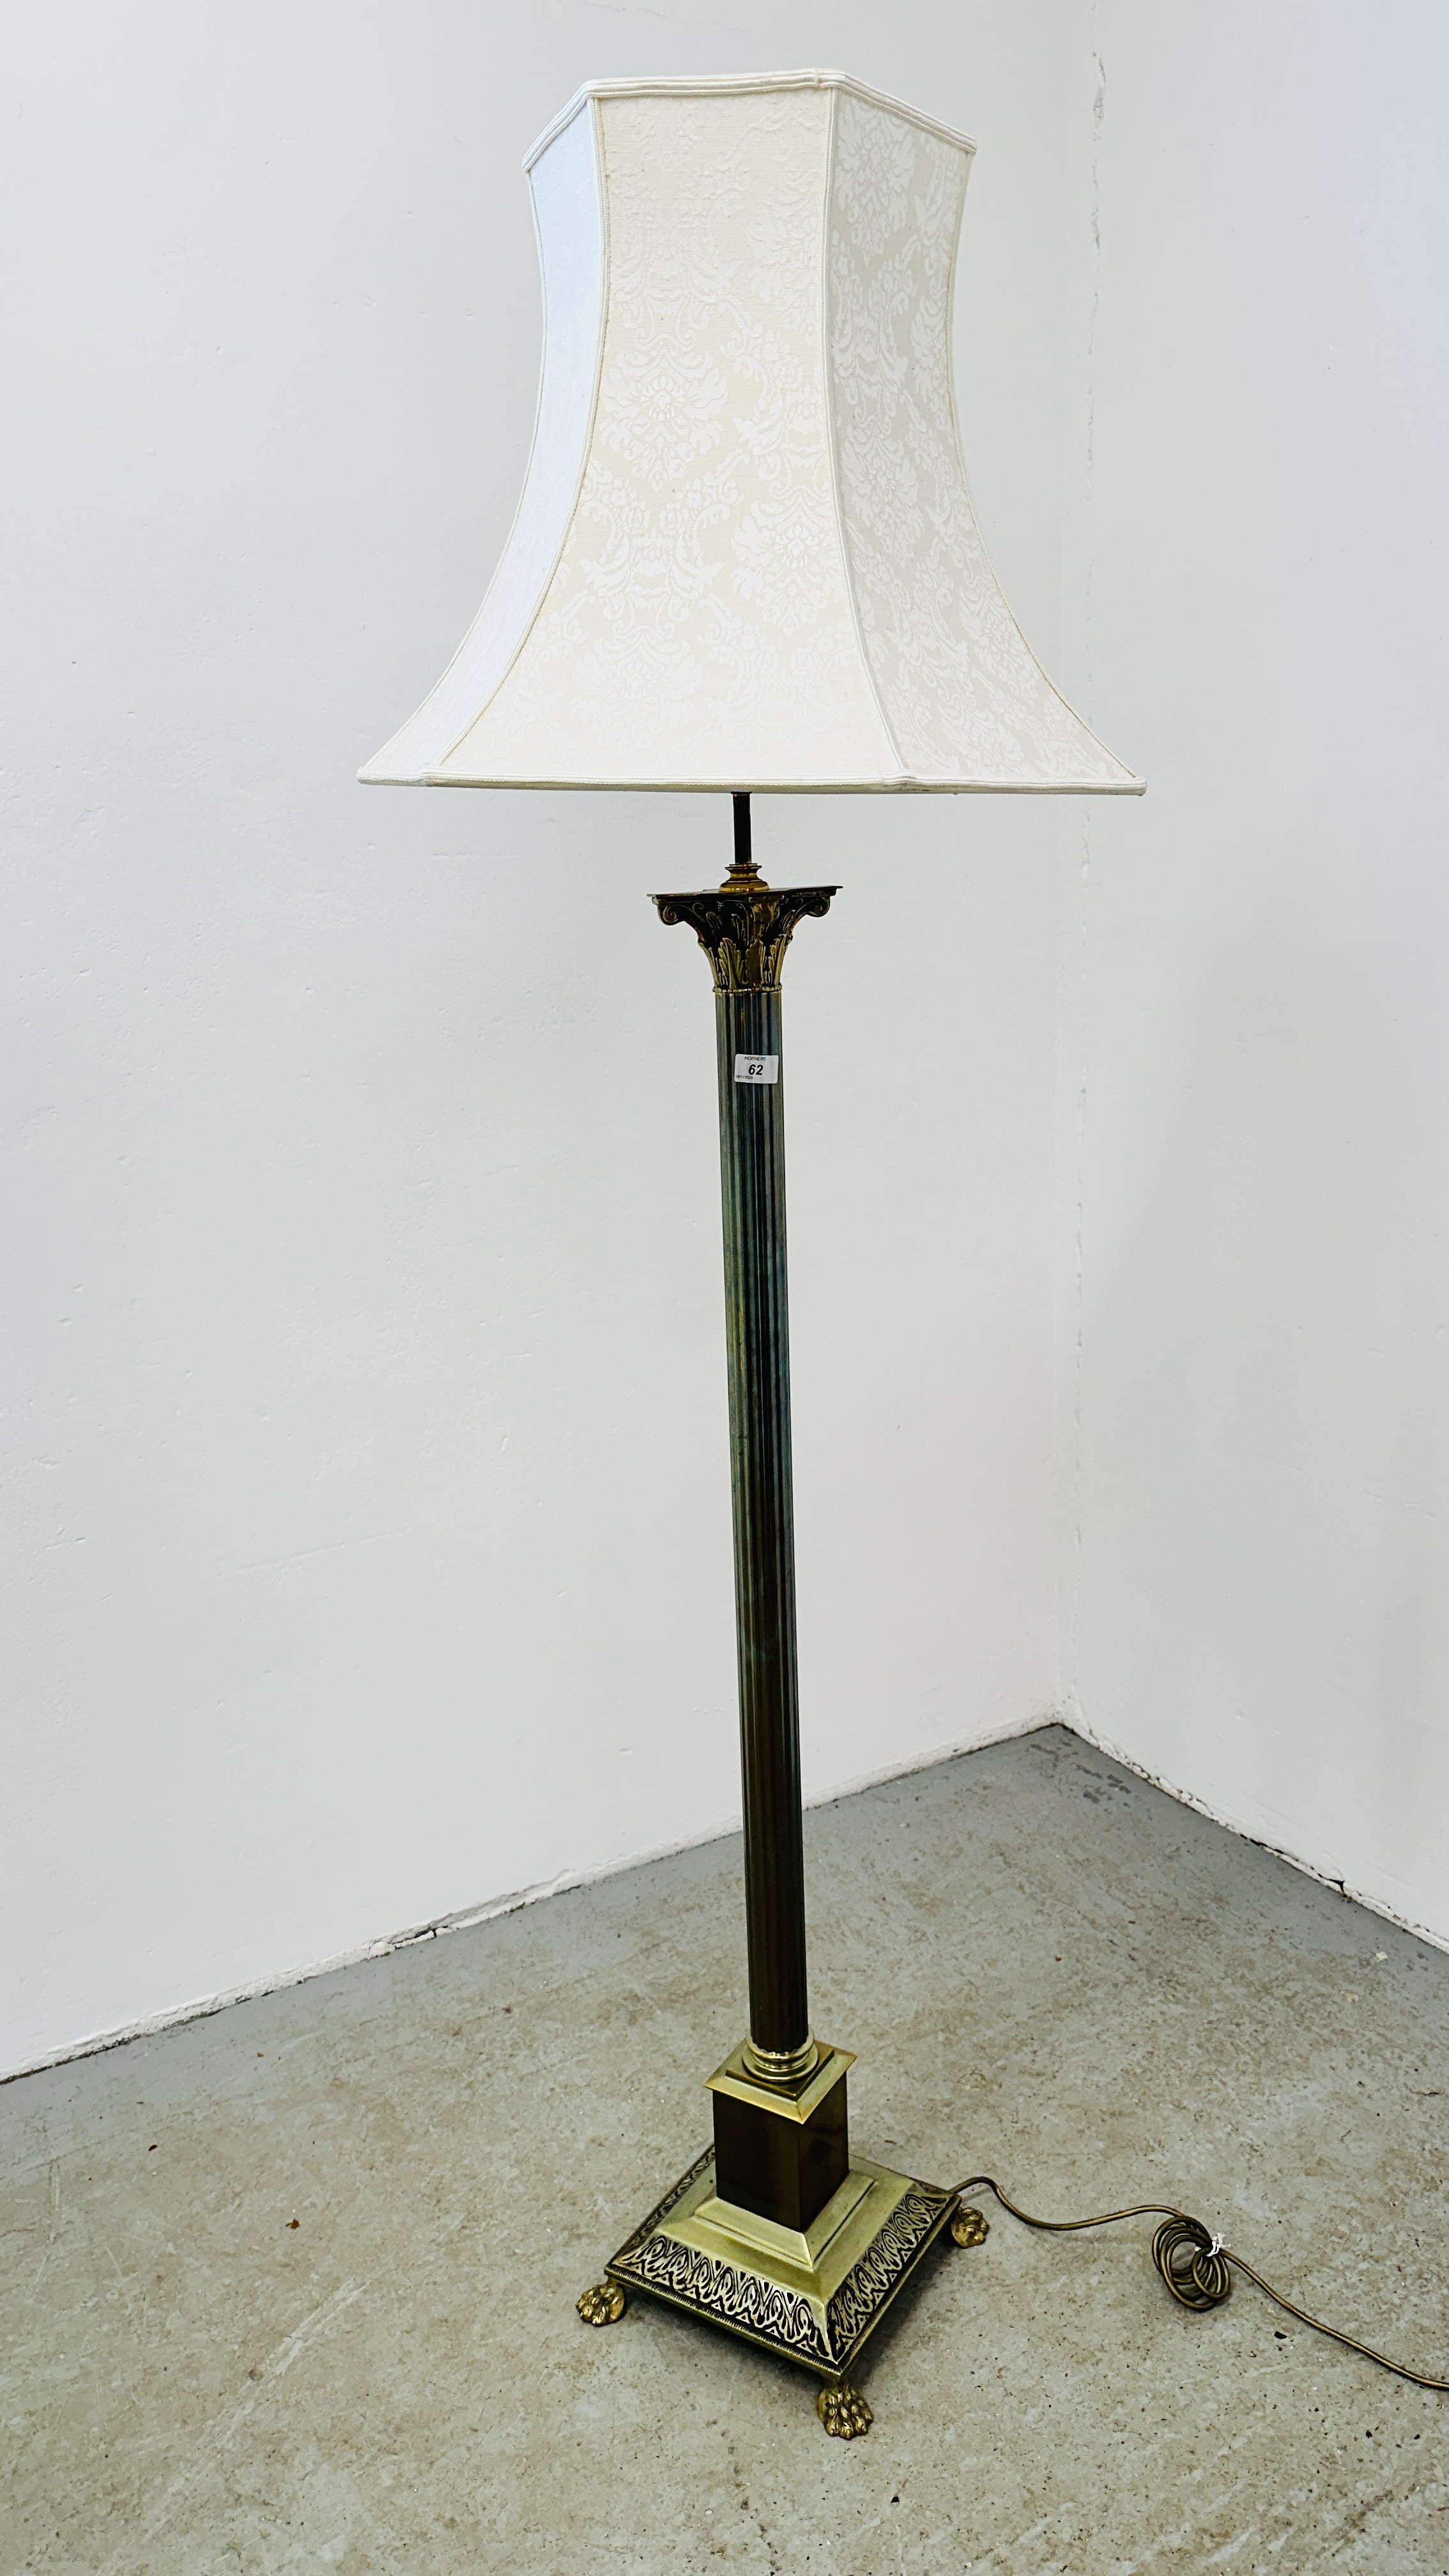 A HEAVY BRASS CORINTHIAN COLUMN DESIGN FLOOR STANDING LAMP WITH CREAM PATTERNED SHADE - CABLE